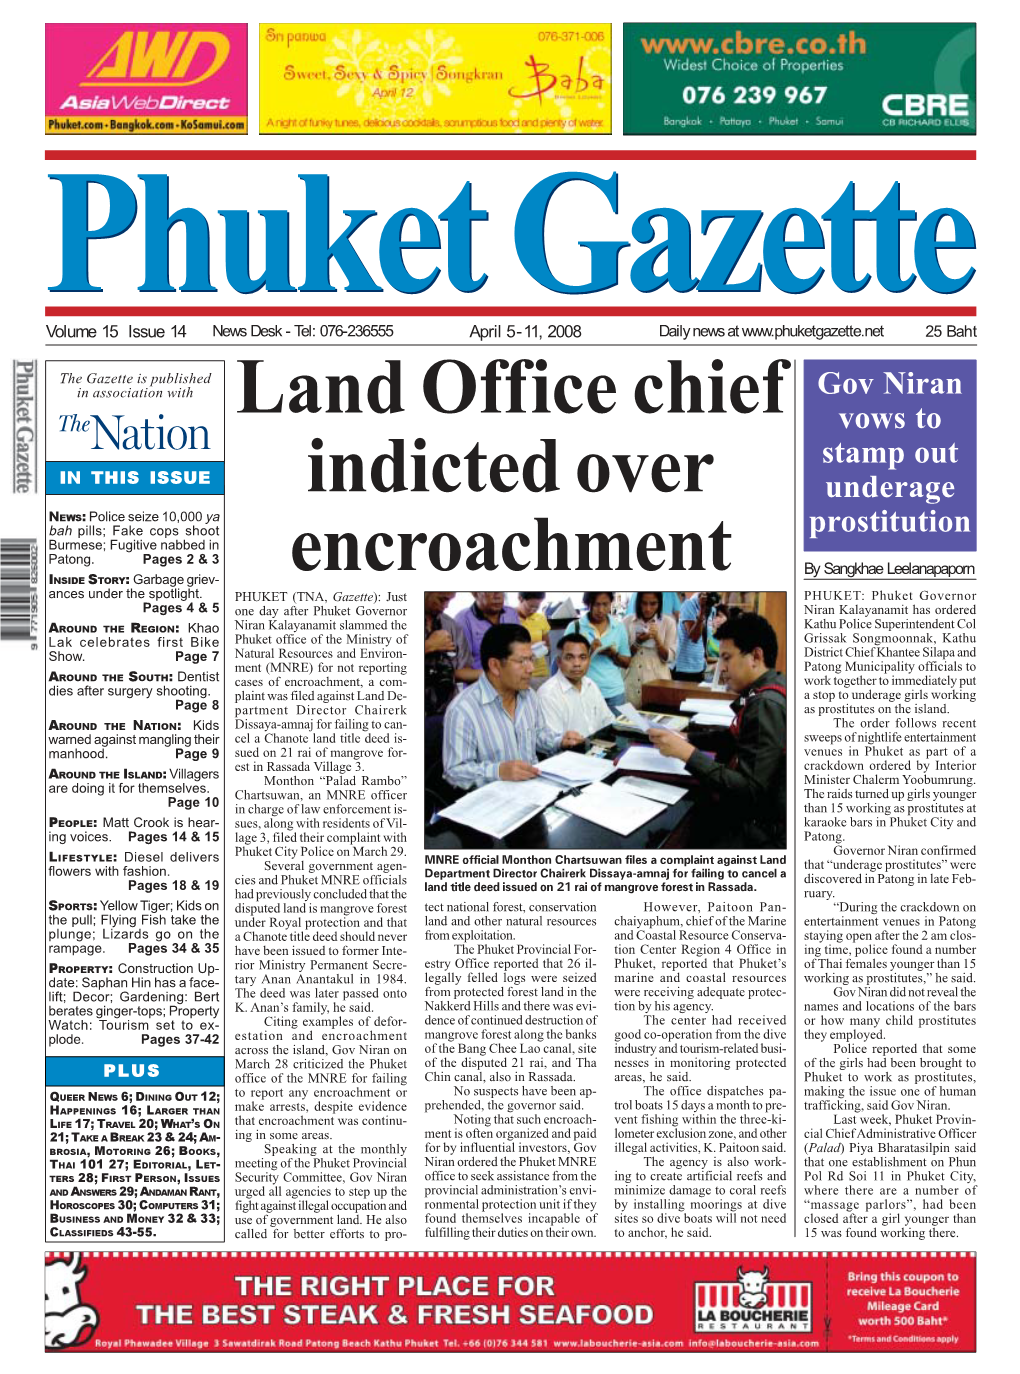 Land Office Chief Indicted Over Encroachment